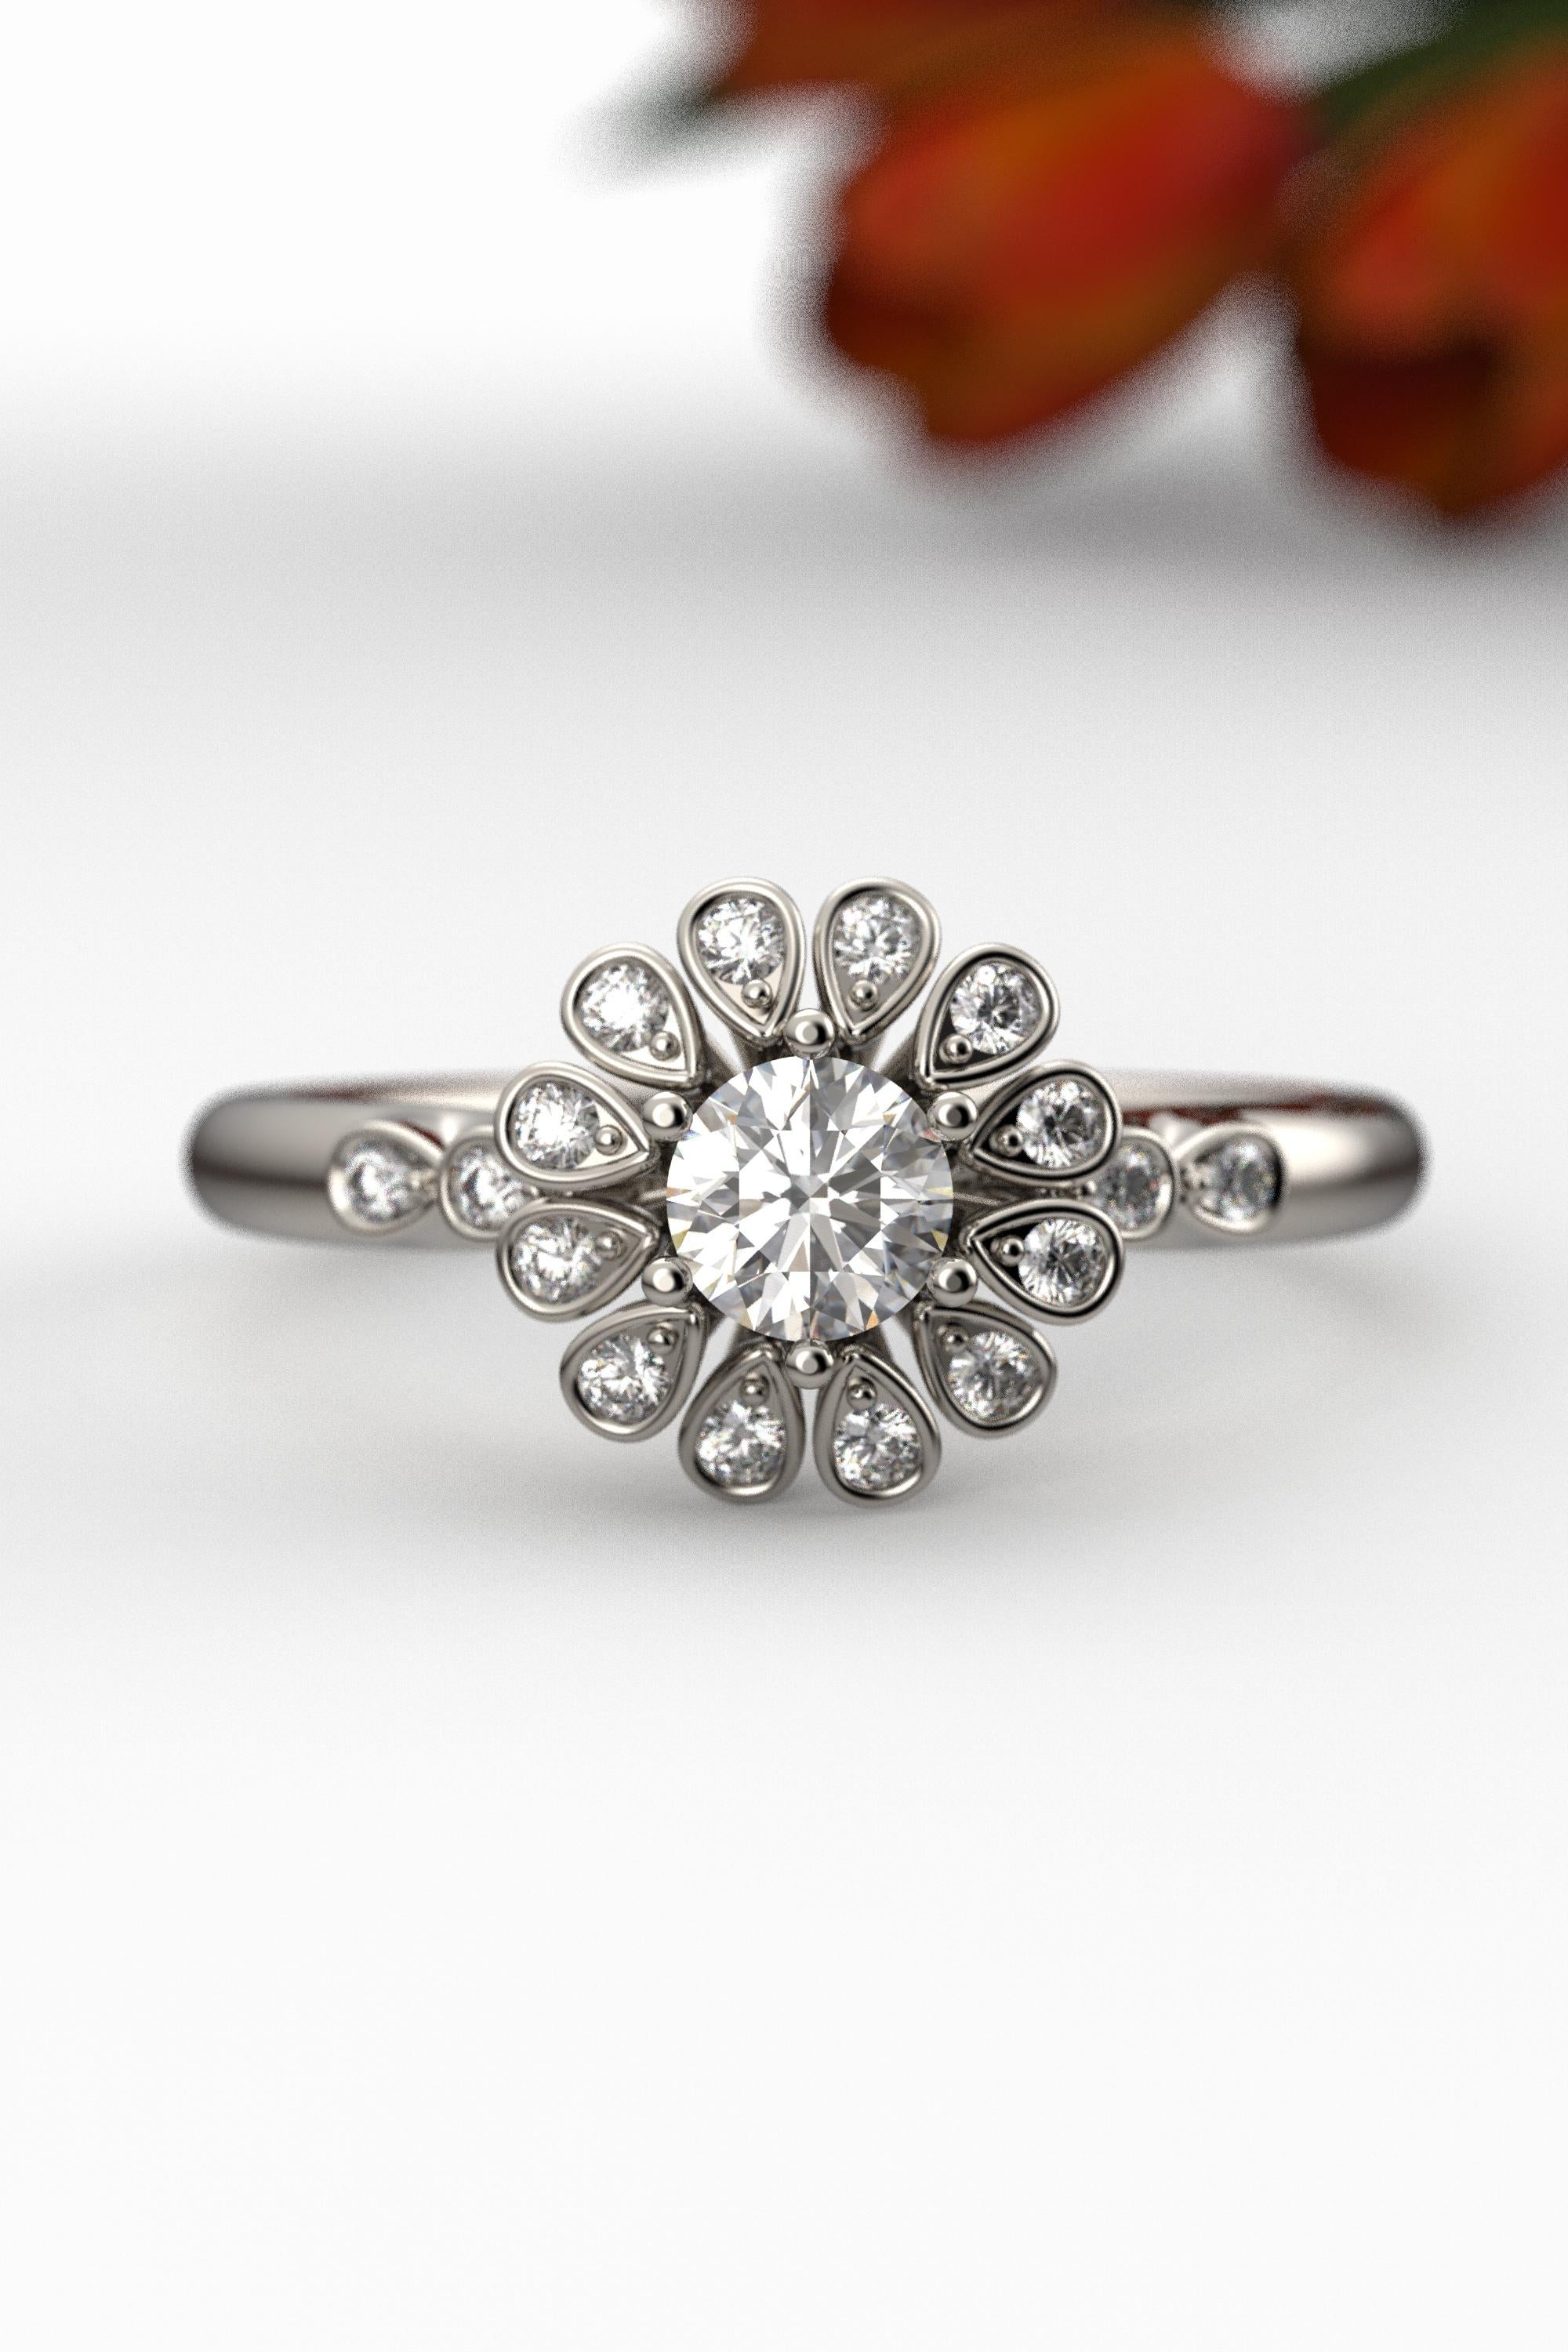 For Sale:  18k Halo Diamond Engagement Ring with 0.32 Carat GIA Certified Center Diamond 9